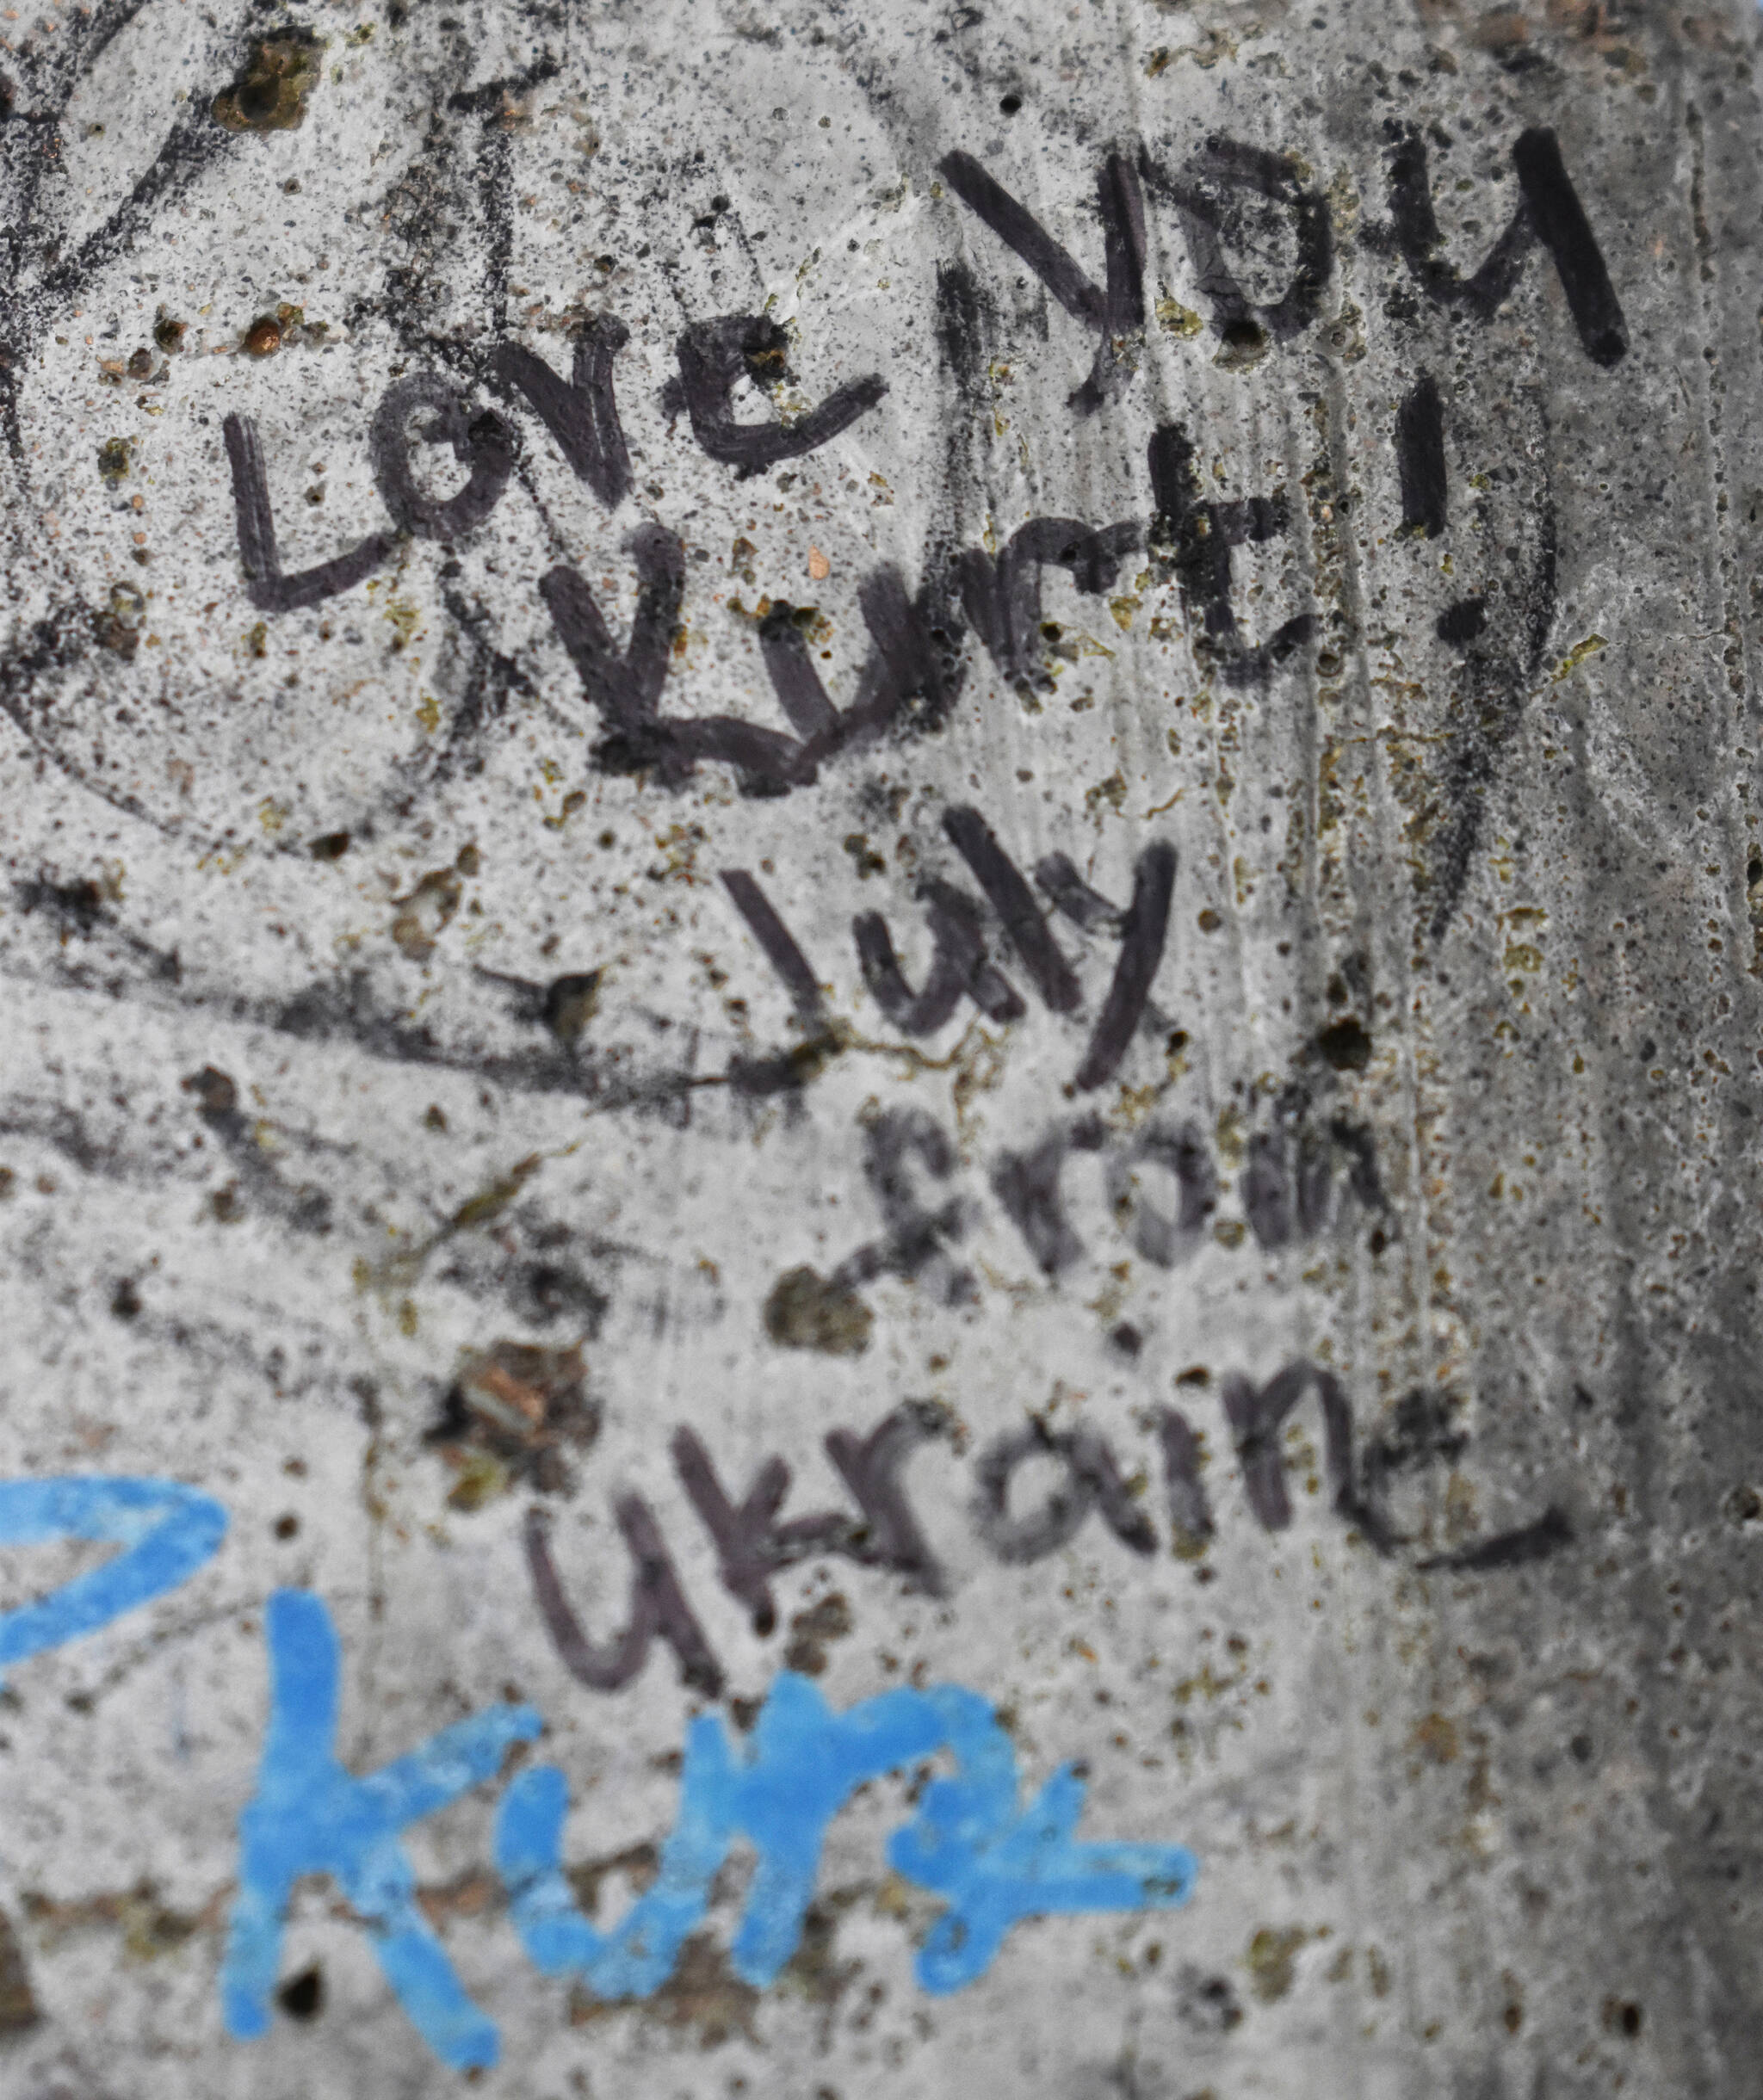 ”Love you Kurt! July from Ukraine,” is an inscription on the guitar statue at Kurt Cobain Memorial Park. The message shows the love for the founding member of Nirvana is worldwide. (Matthew N. Wells / The Daily World)